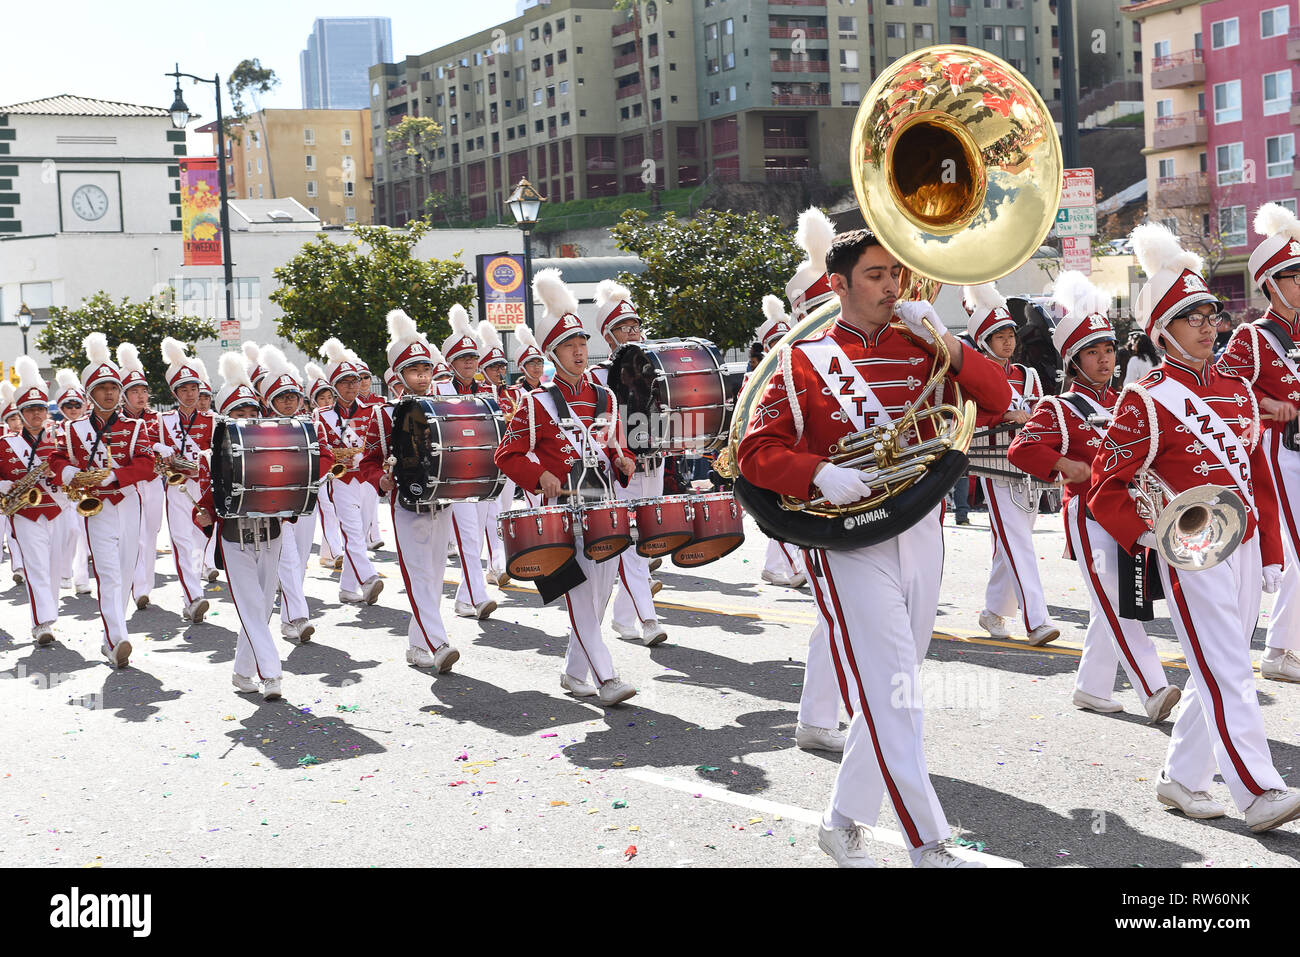 LOS ANGELES - Februar 9, 2019: Mark Keppel High School Marching Band an der Los Angeles Chinese New Year Parade. Stockfoto